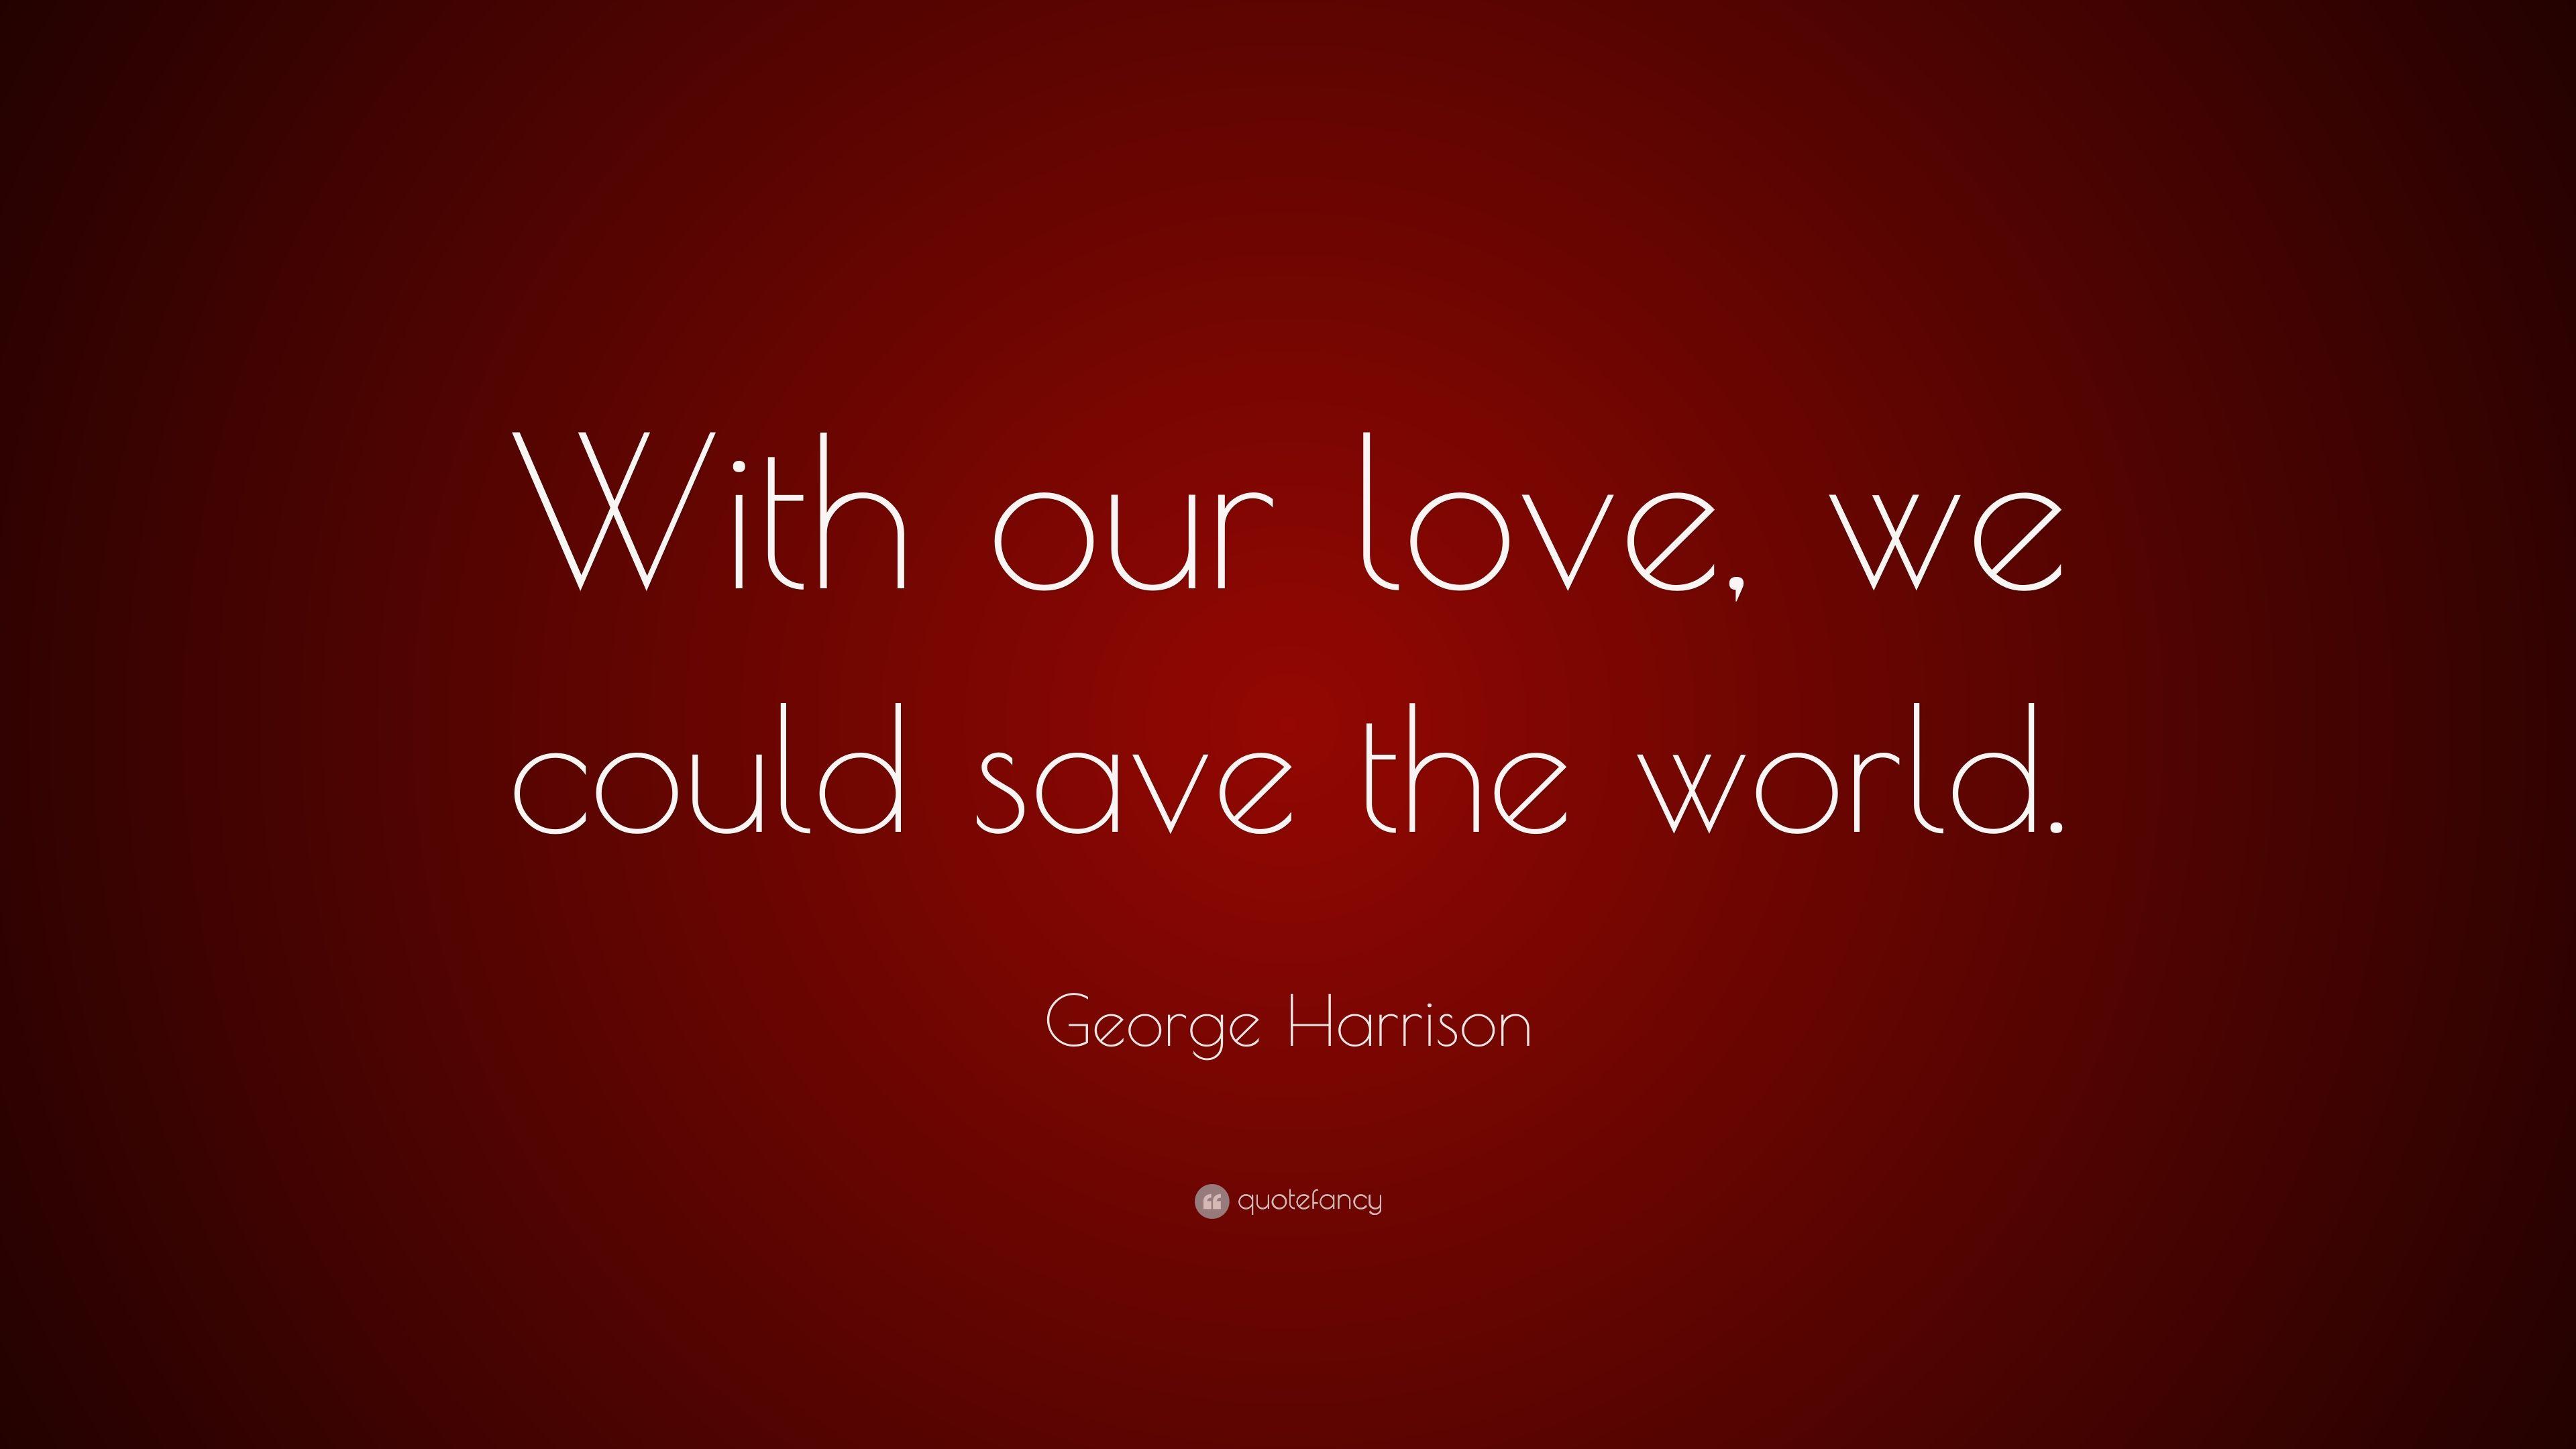 George Harrison Quote: “With our love, we could save the world.” 12